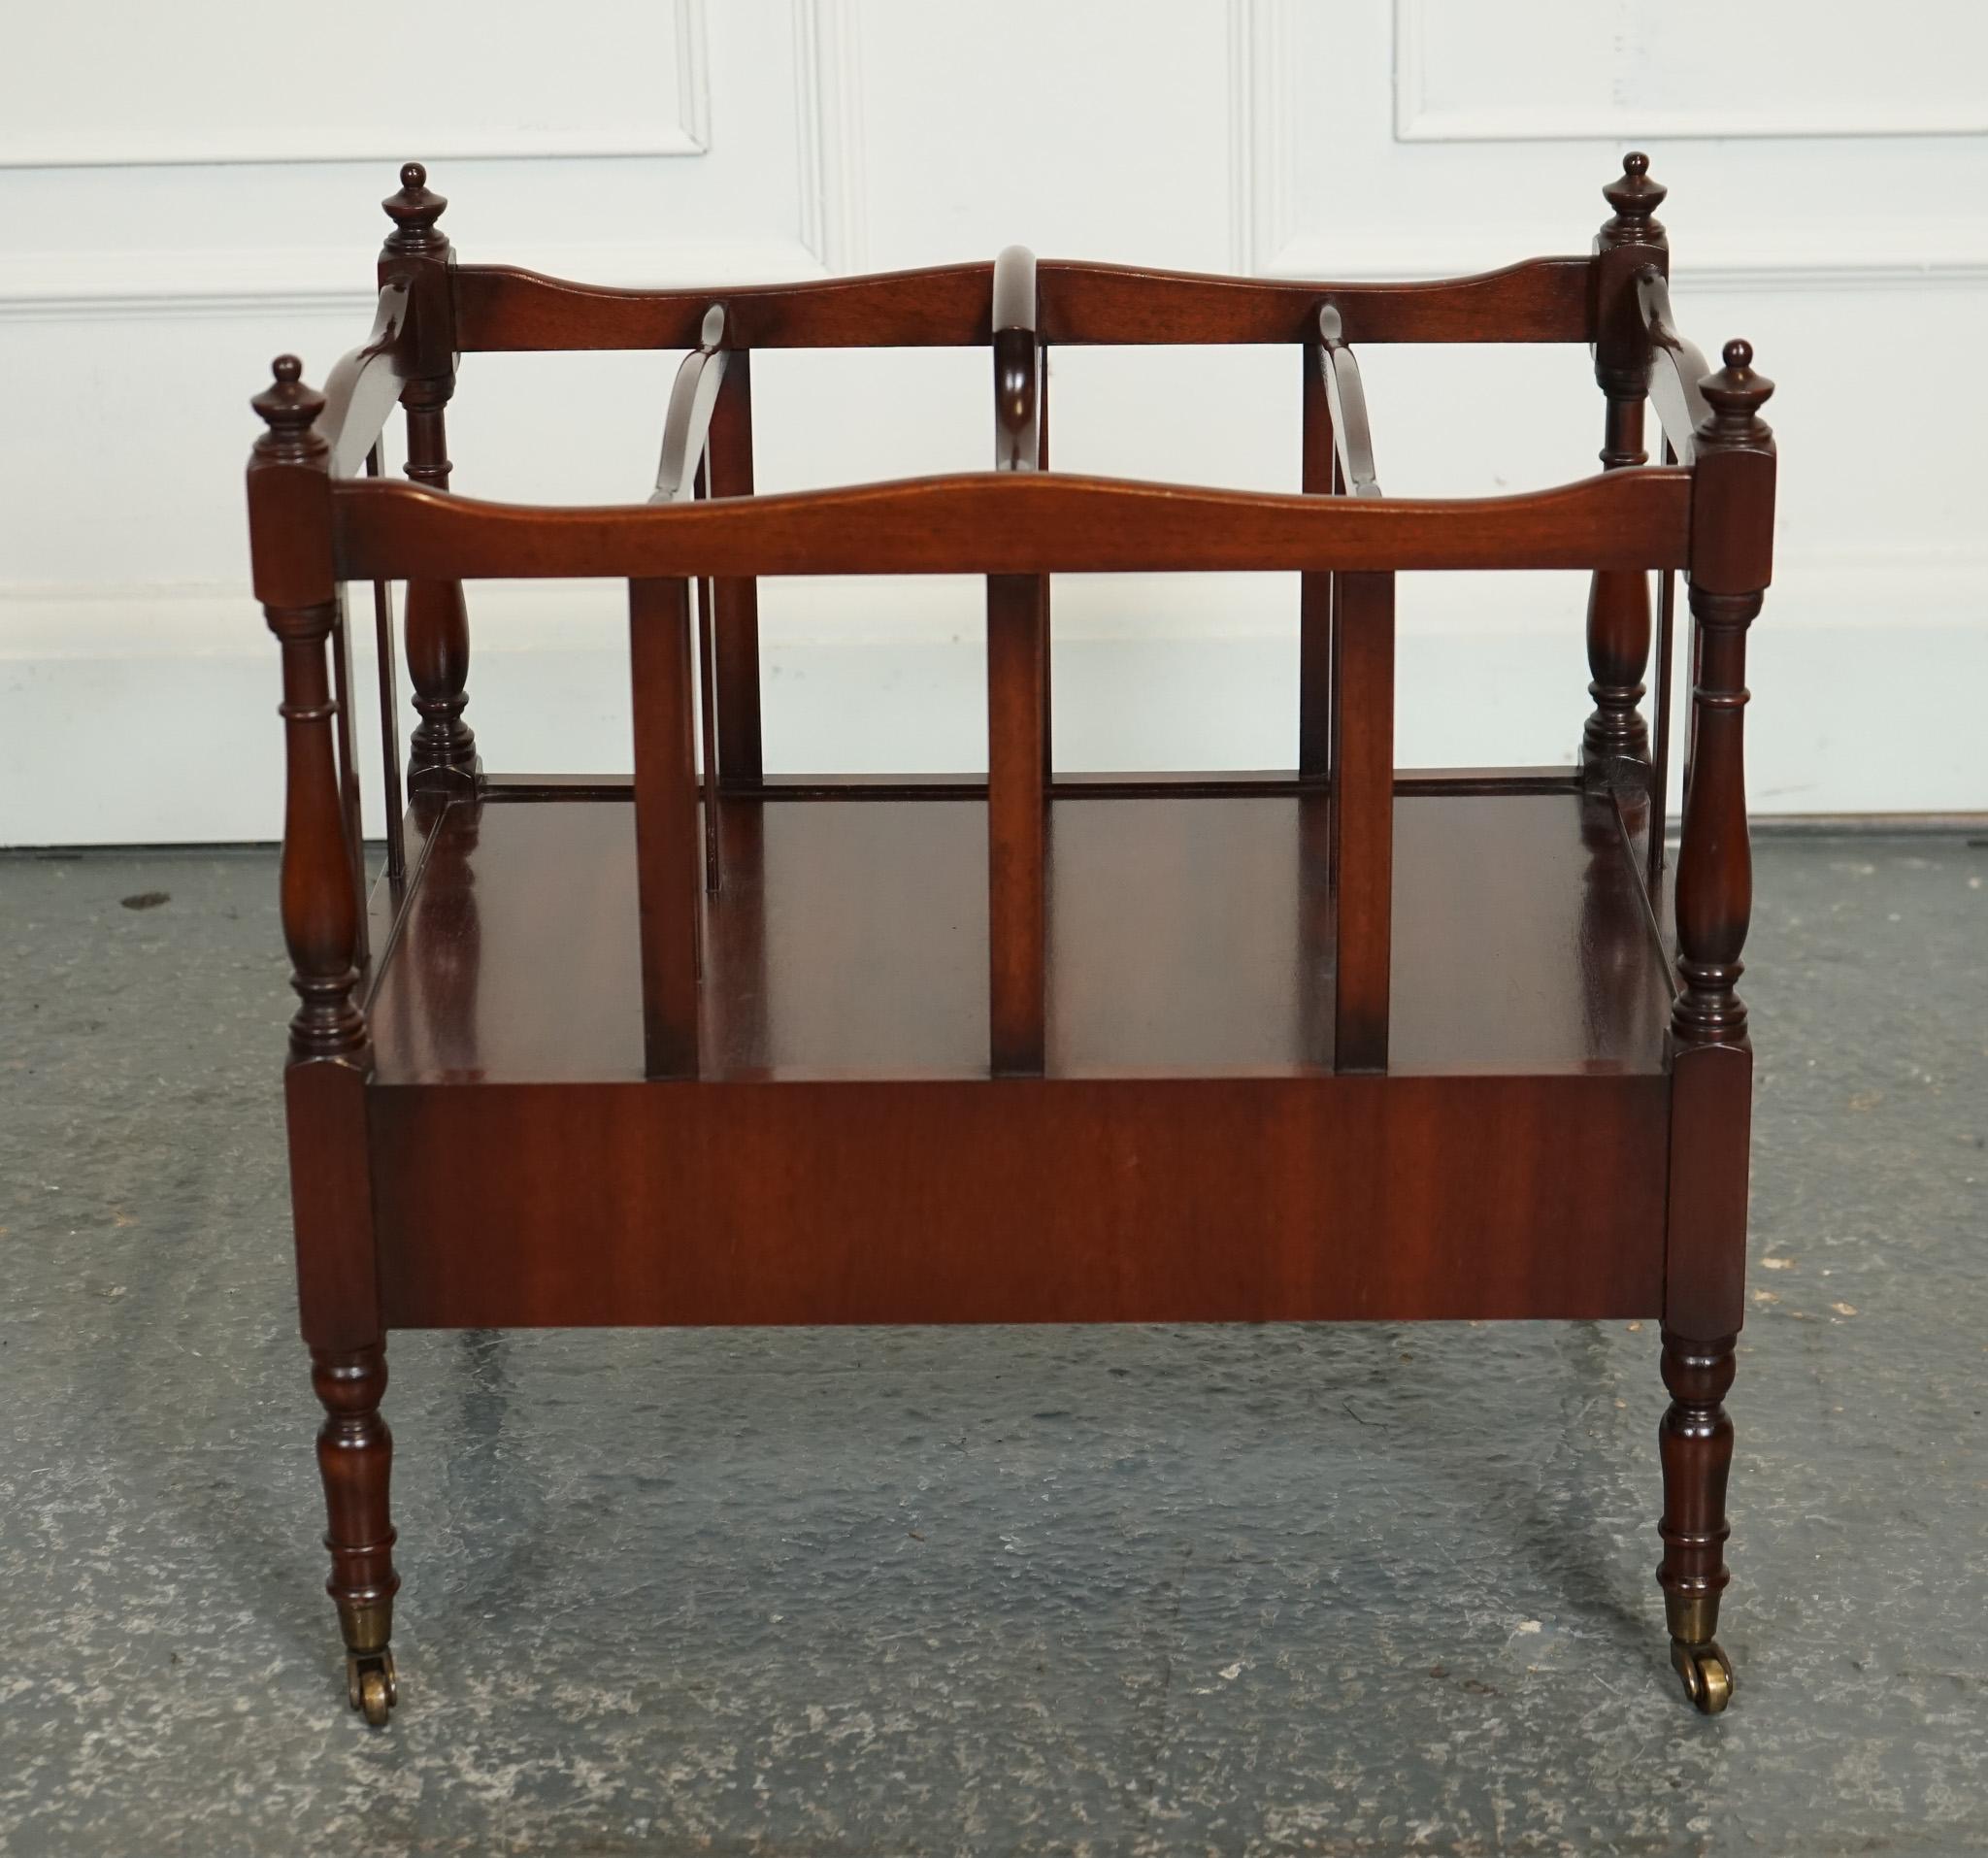 GORGEOUS ViNTAGE MAHOGANY CANTERBURY NEWSPAPER RACK J1 In Good Condition For Sale In Pulborough, GB